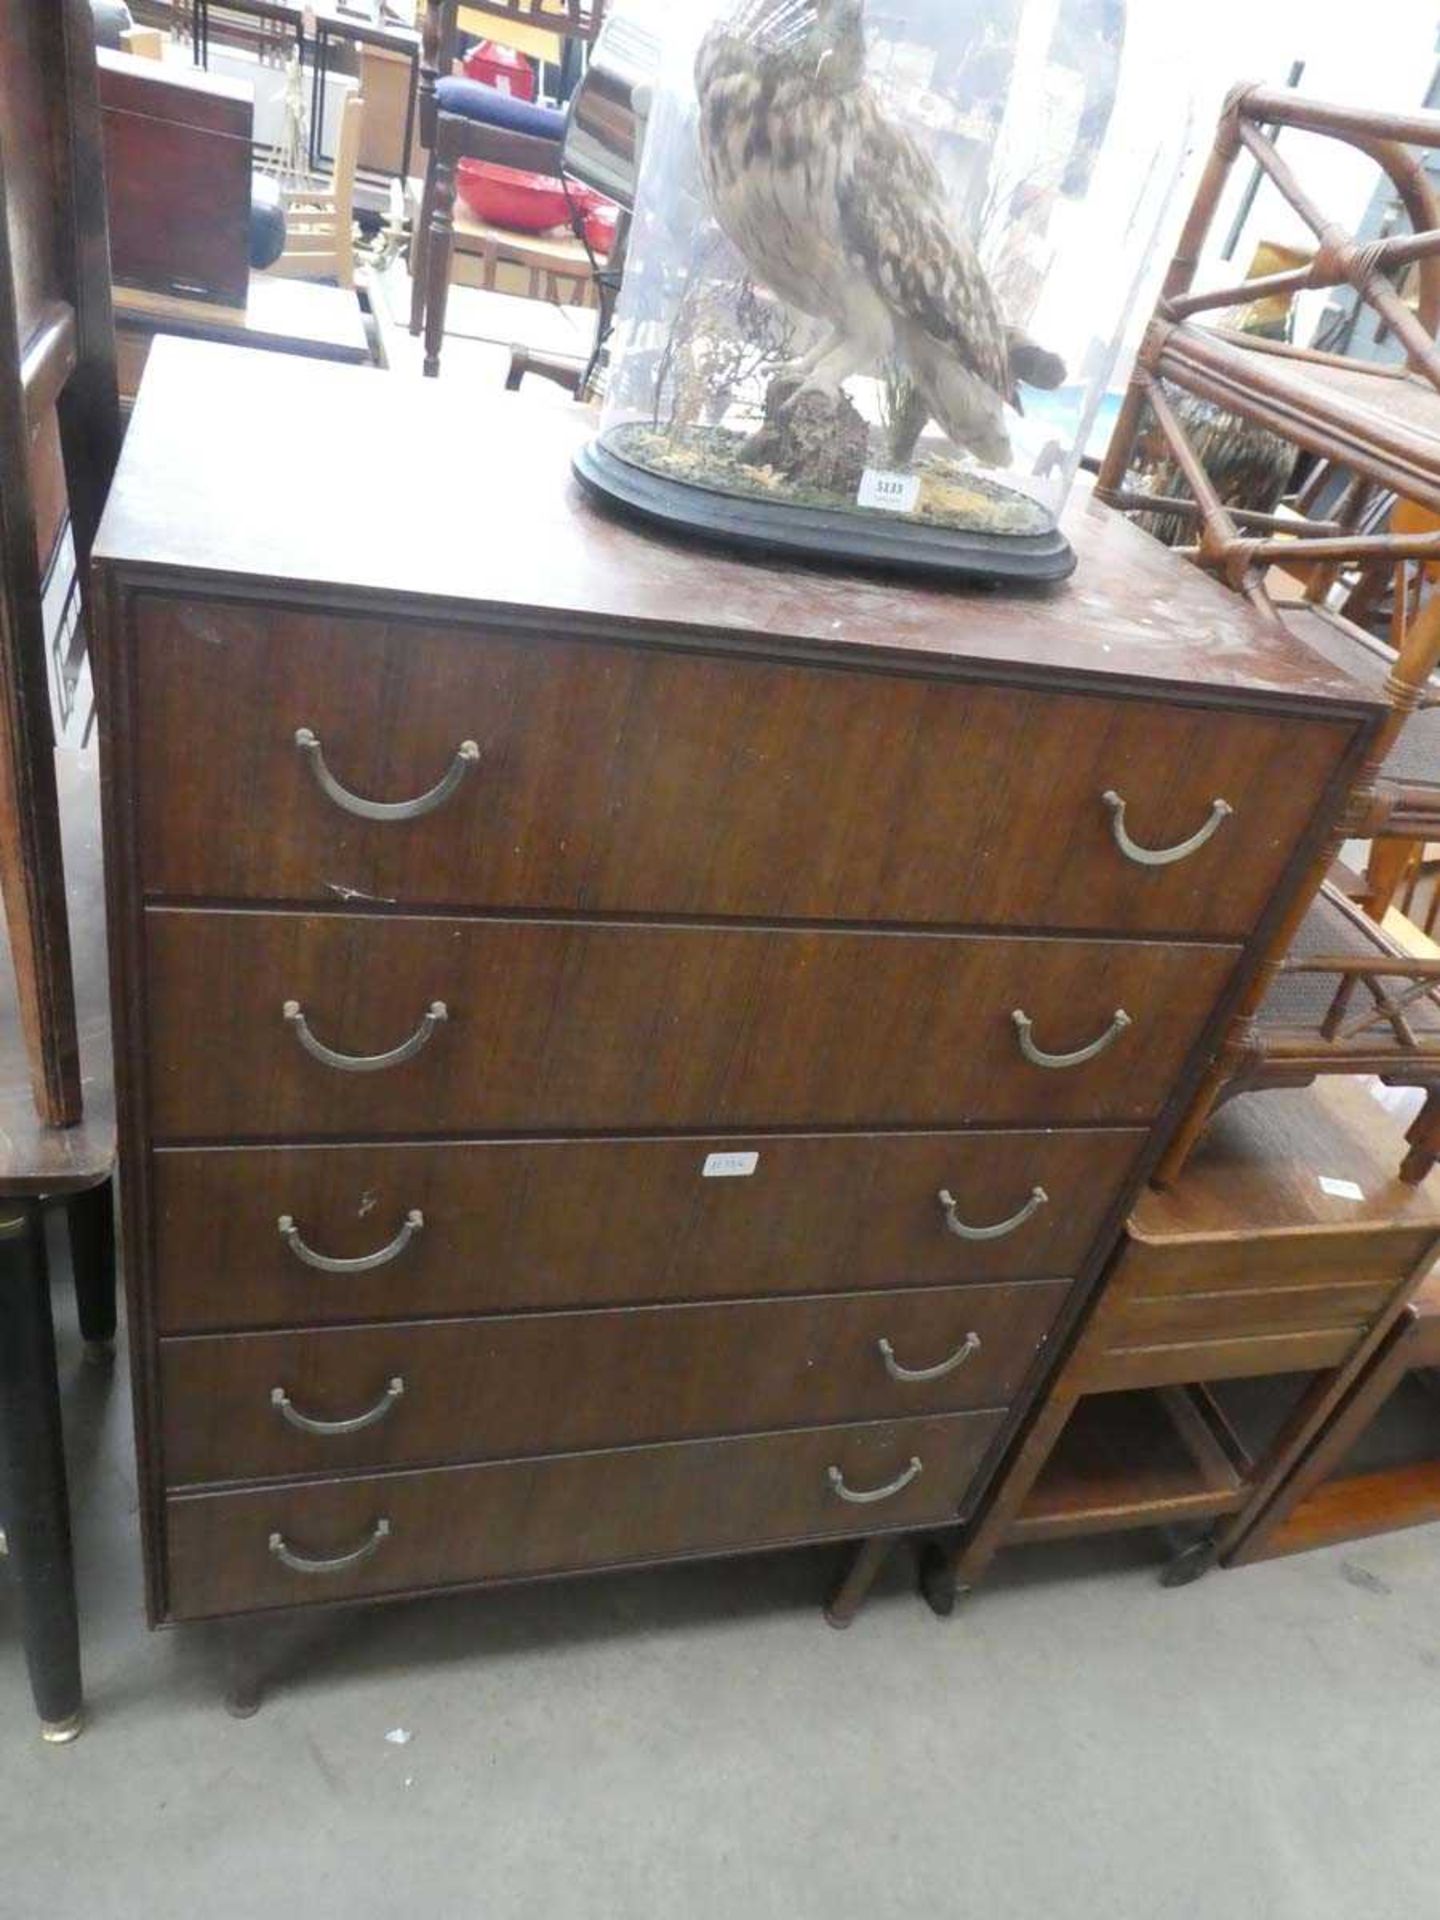 Mid-20th century chest of 5 drawers, chest of 4 drawers, coffee table and side table - Image 3 of 3